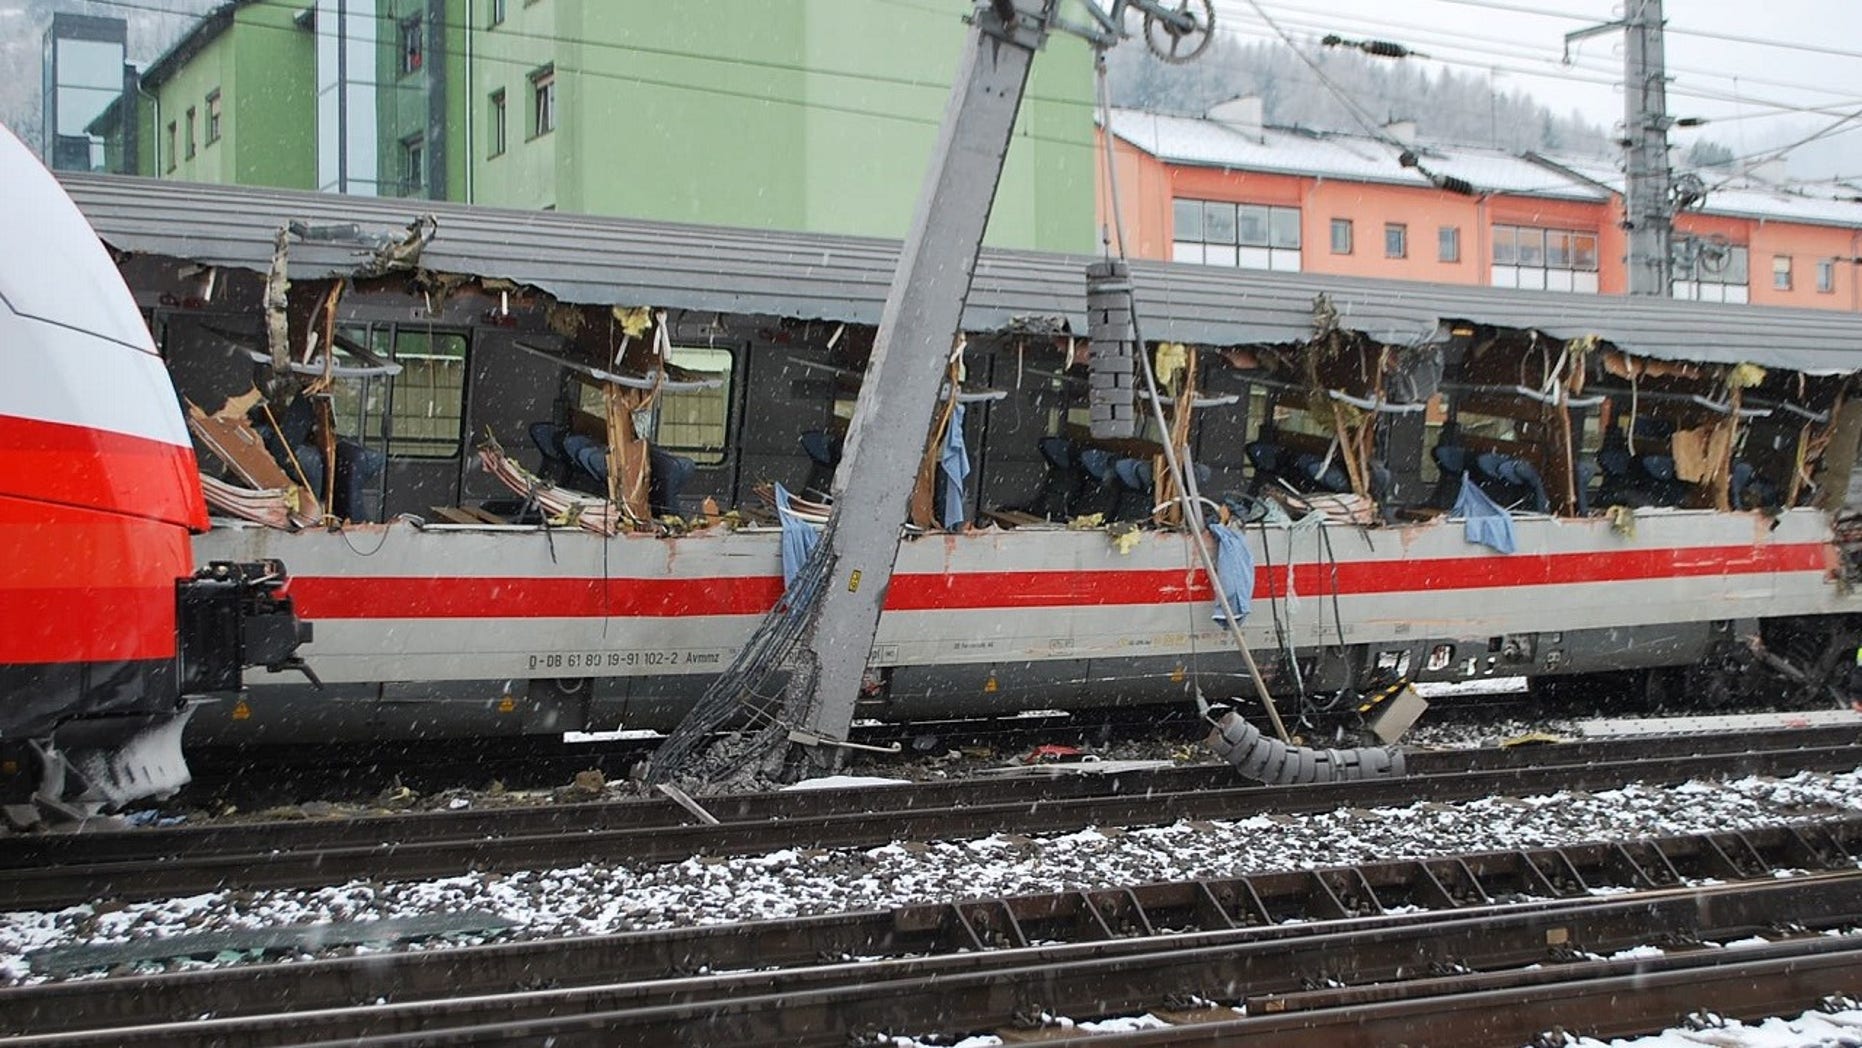 Austria trains collide in deadly accident Fox News